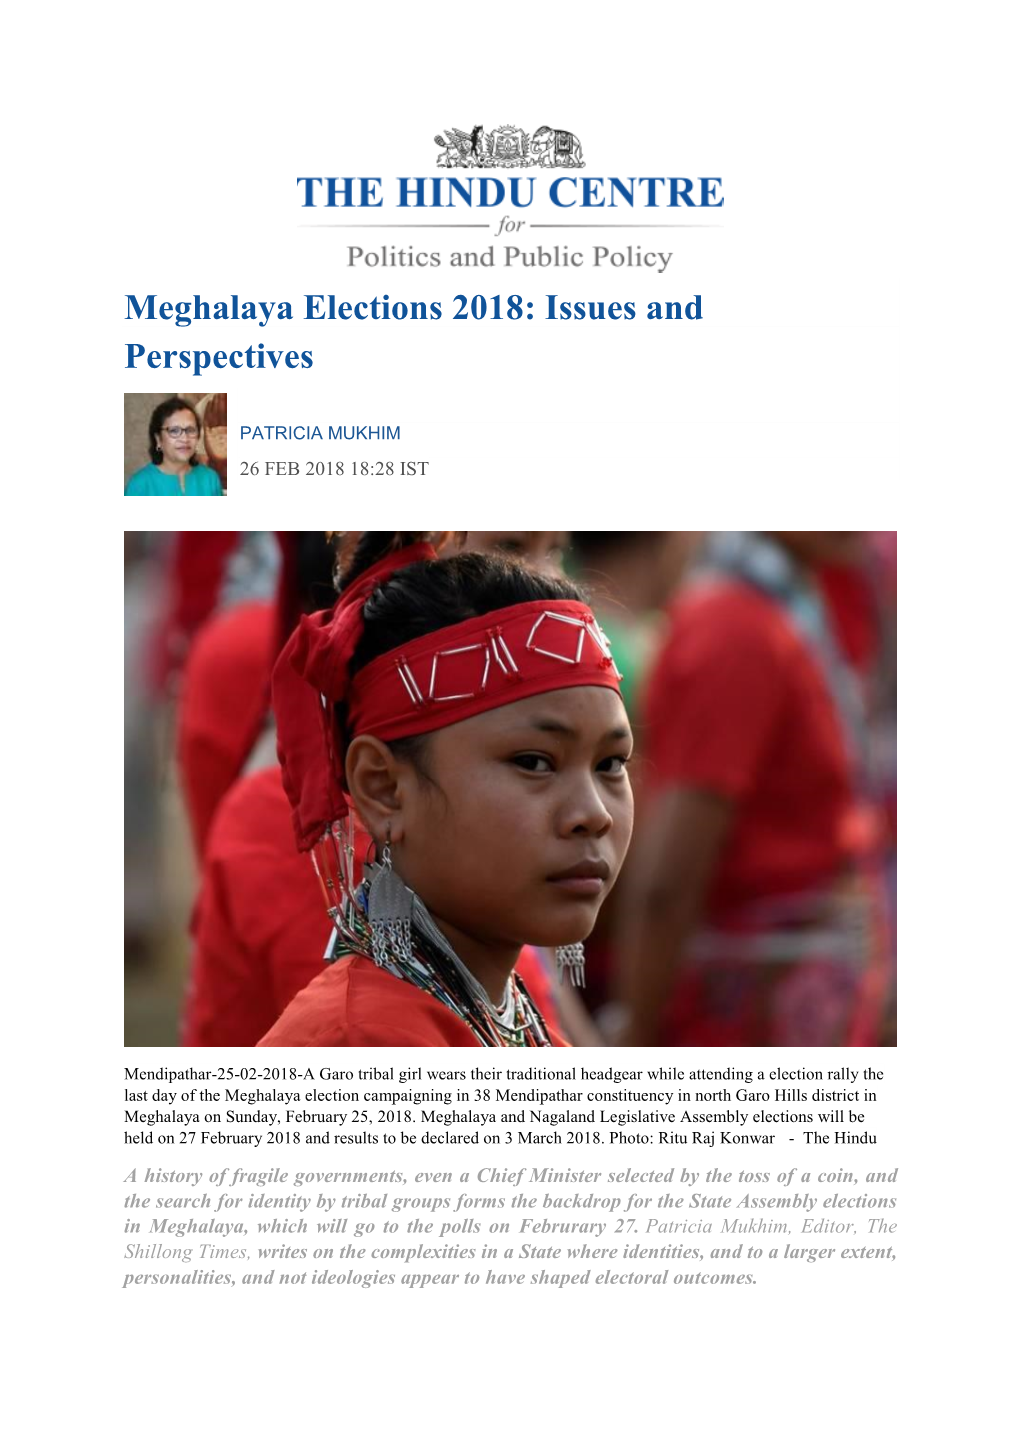 Meghalaya Elections 2018: Issues and Perspectives